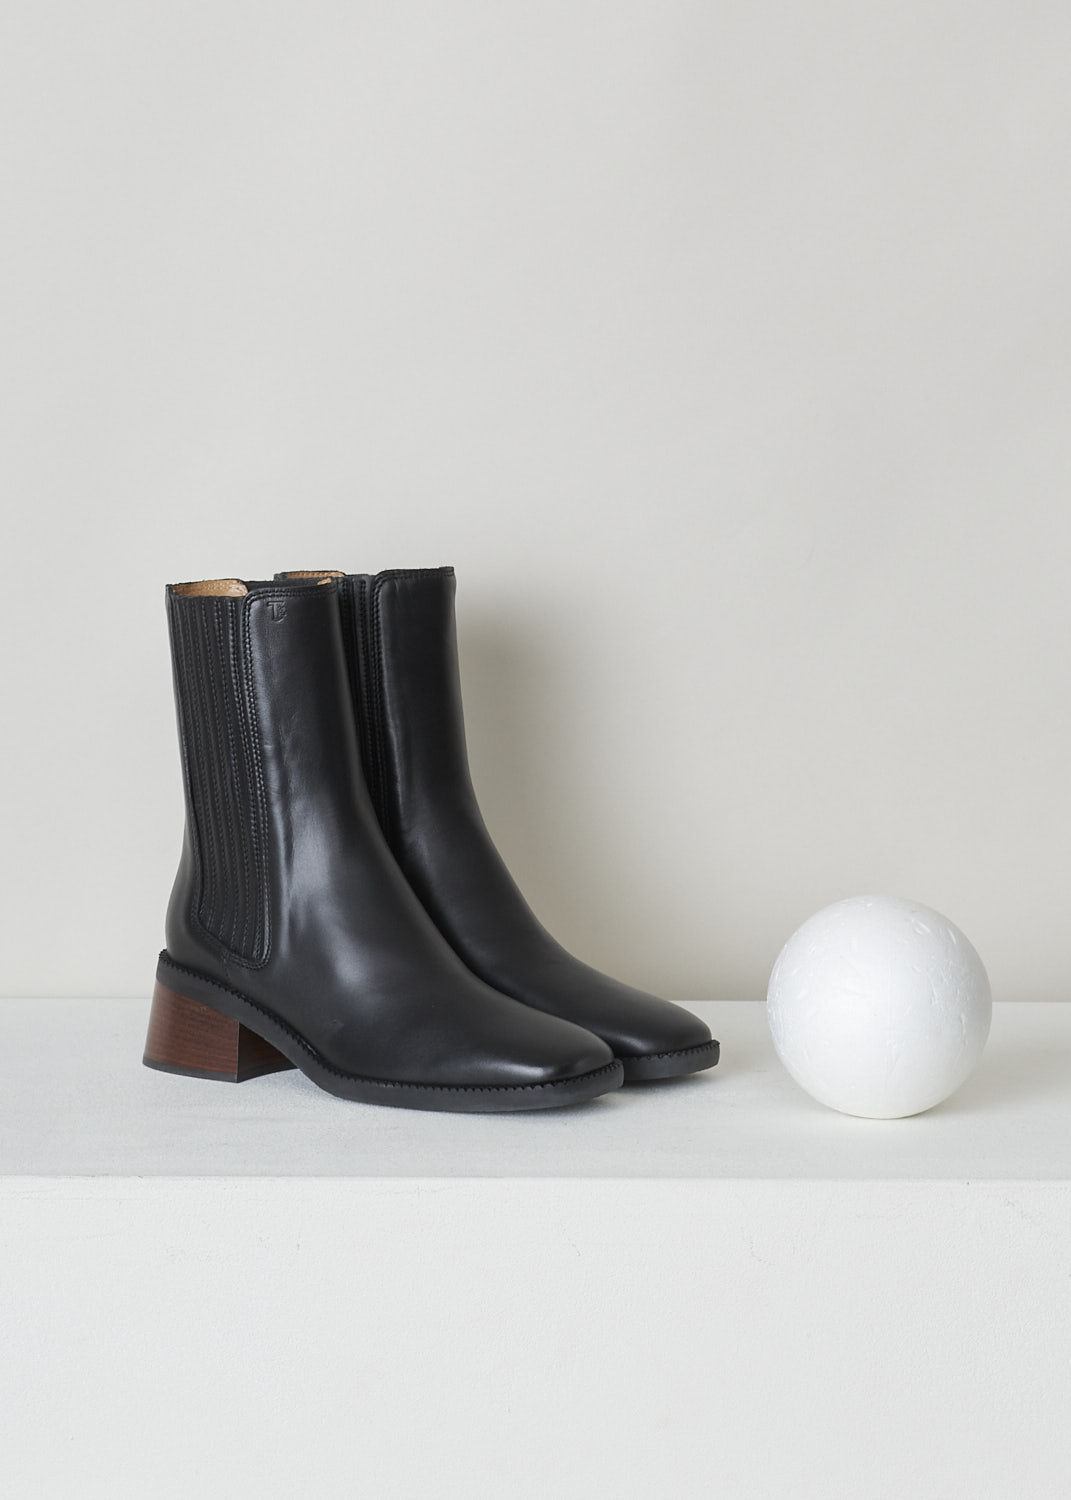 TODS, BLACK BOOTS WITH GUSSETED SIDES, XXW48K0FX80TFSB999_T55_TRONCH_ELAST, Black, Front, These black leather slip-on boots feature elasticated gusseted sides with a ribbed pattern, a squared toe and a block heel in brown. 

